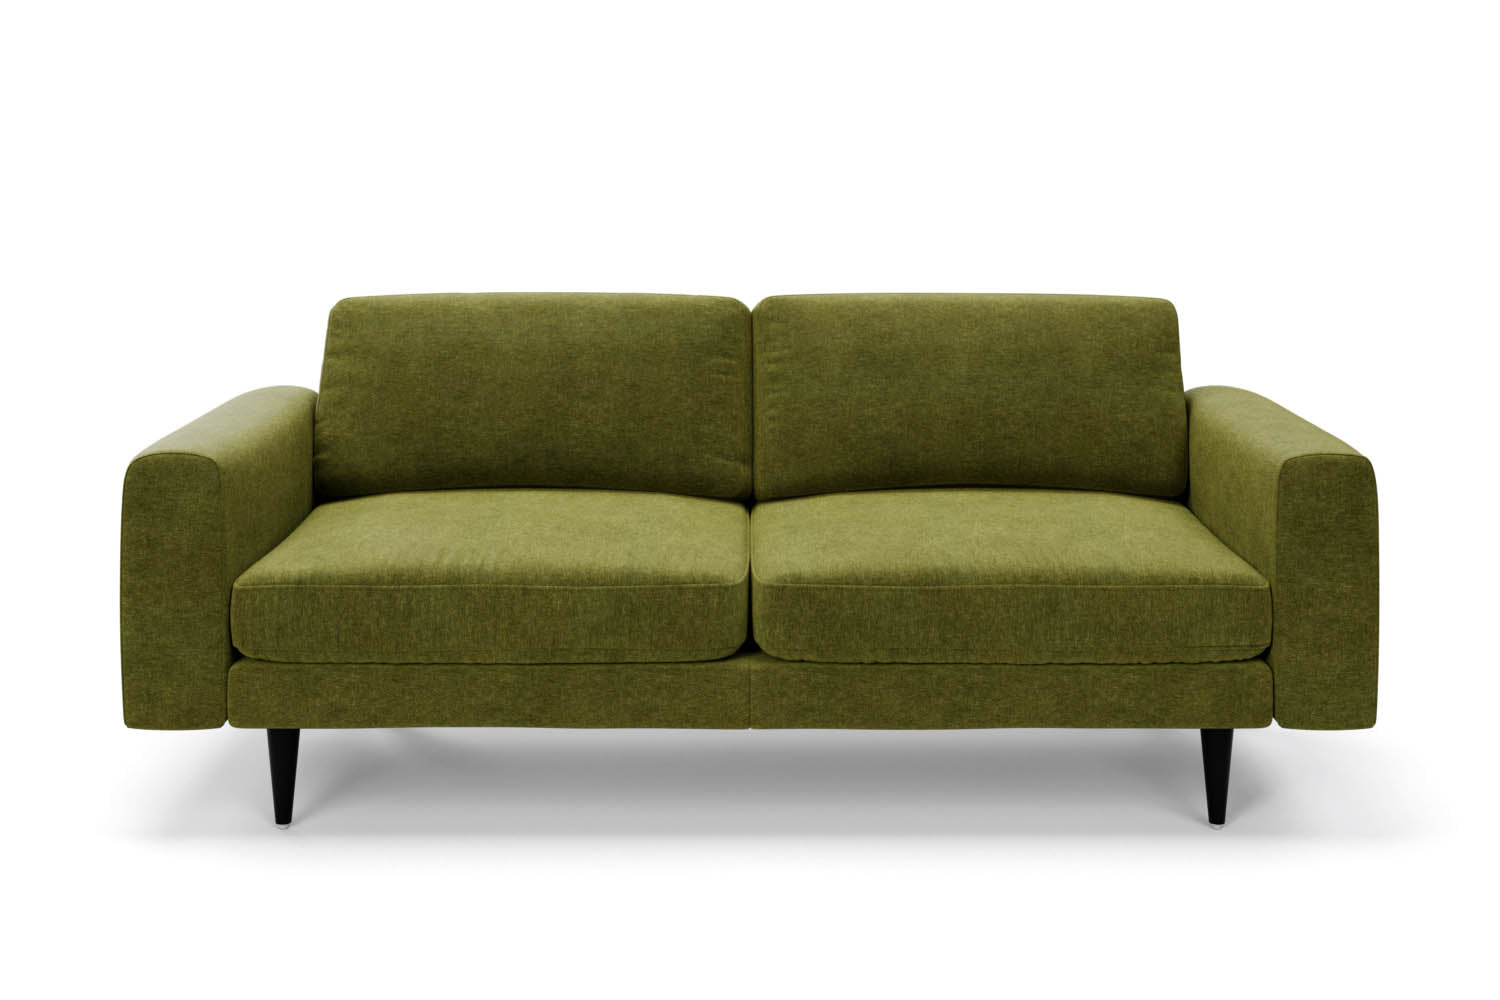 The Big Chill 3 Seater Sofa in Moss Chenille with black legs front variant_40886288154672